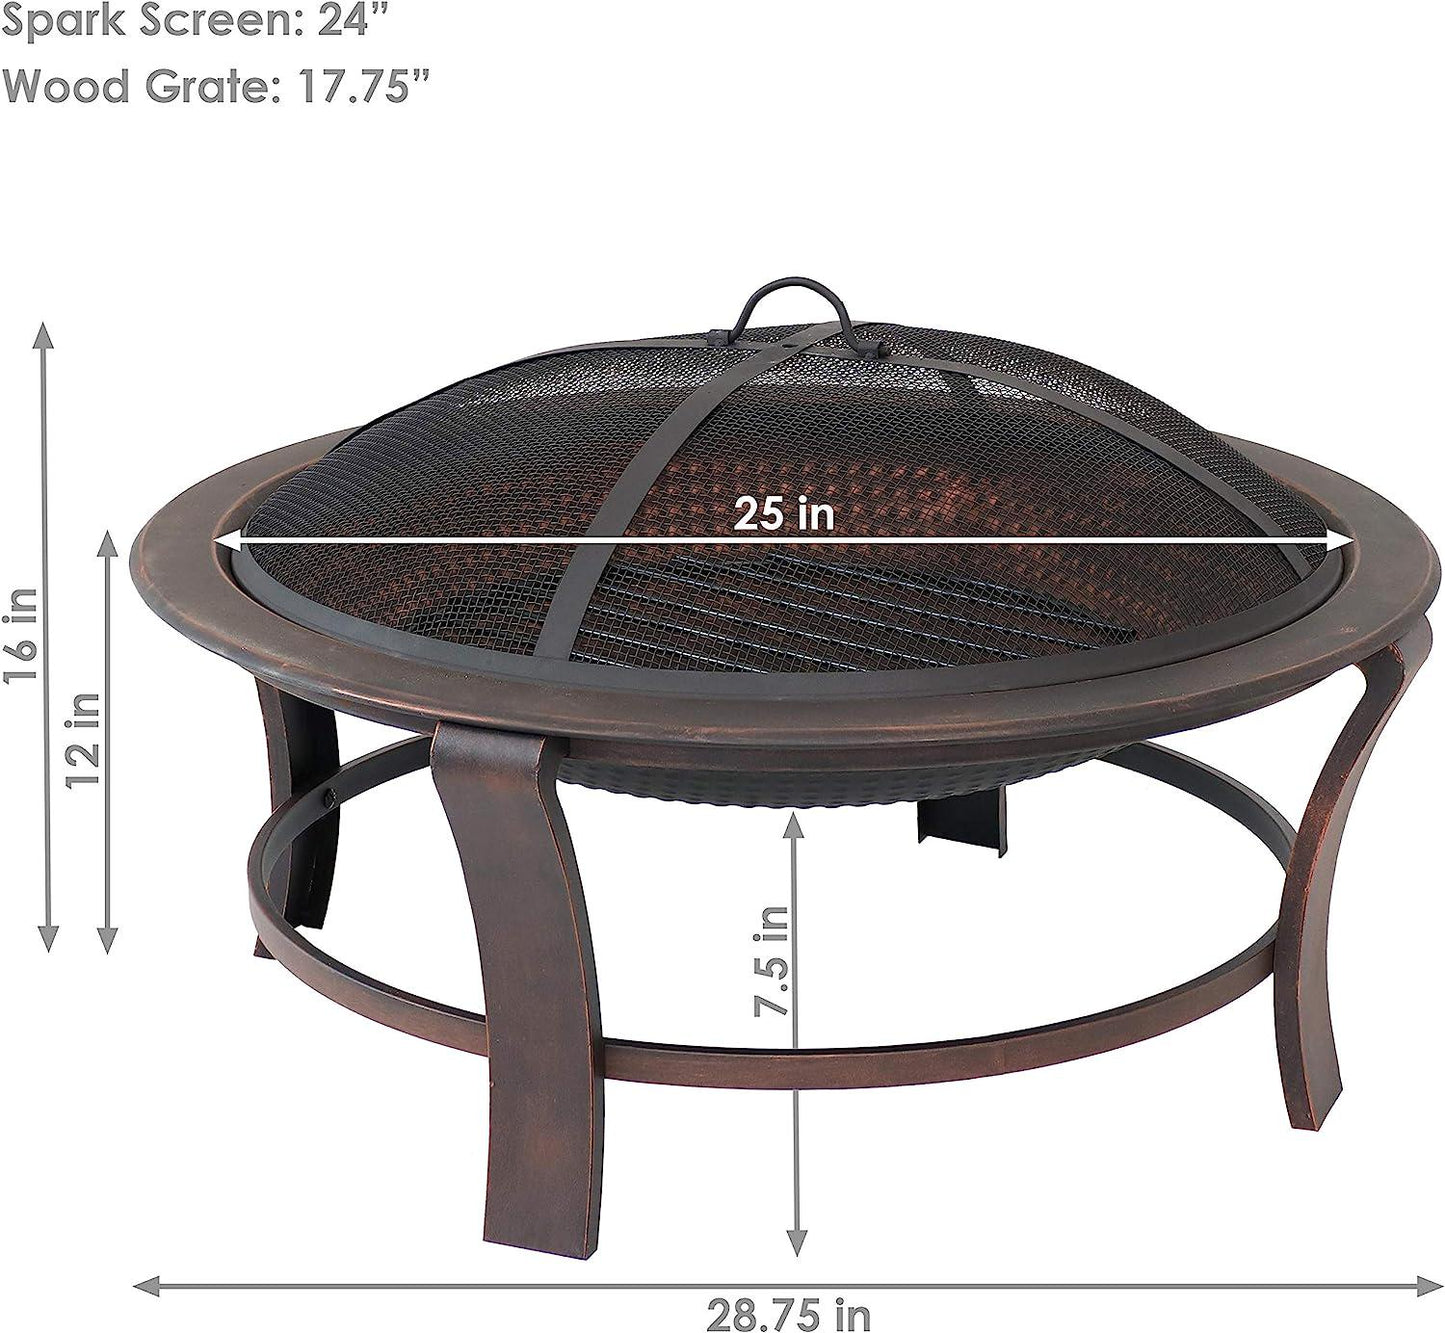 29-Inch Elevated Wood-Burning Fire Pit Bowl with Stand - Includes Spark Screen, Wood Grate, and Poker